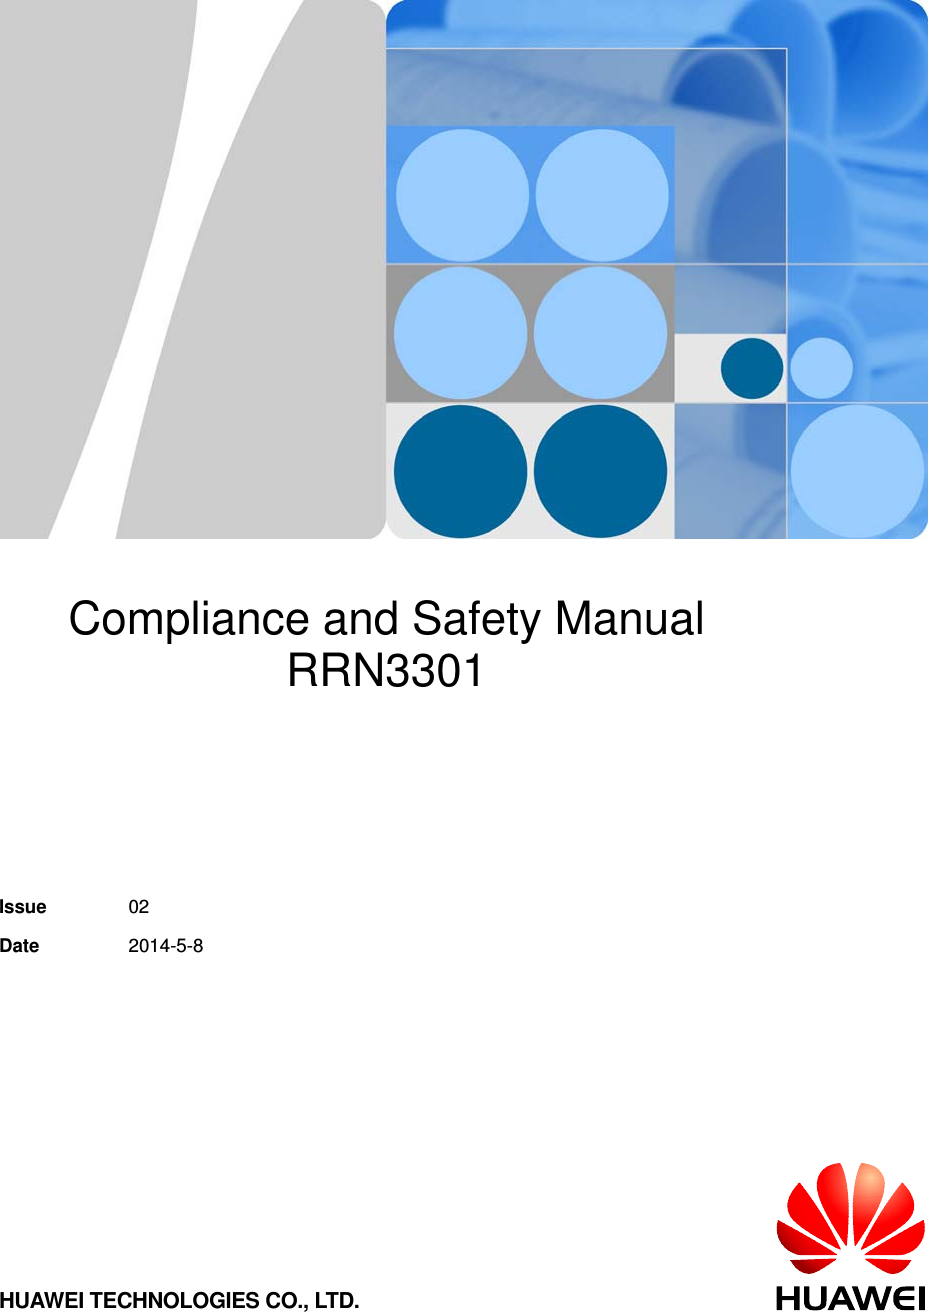        Compliance and Safety Manual RRN3301    Issue  02 Date  2014-5-8 HUAWEI TECHNOLOGIES CO., LTD. 